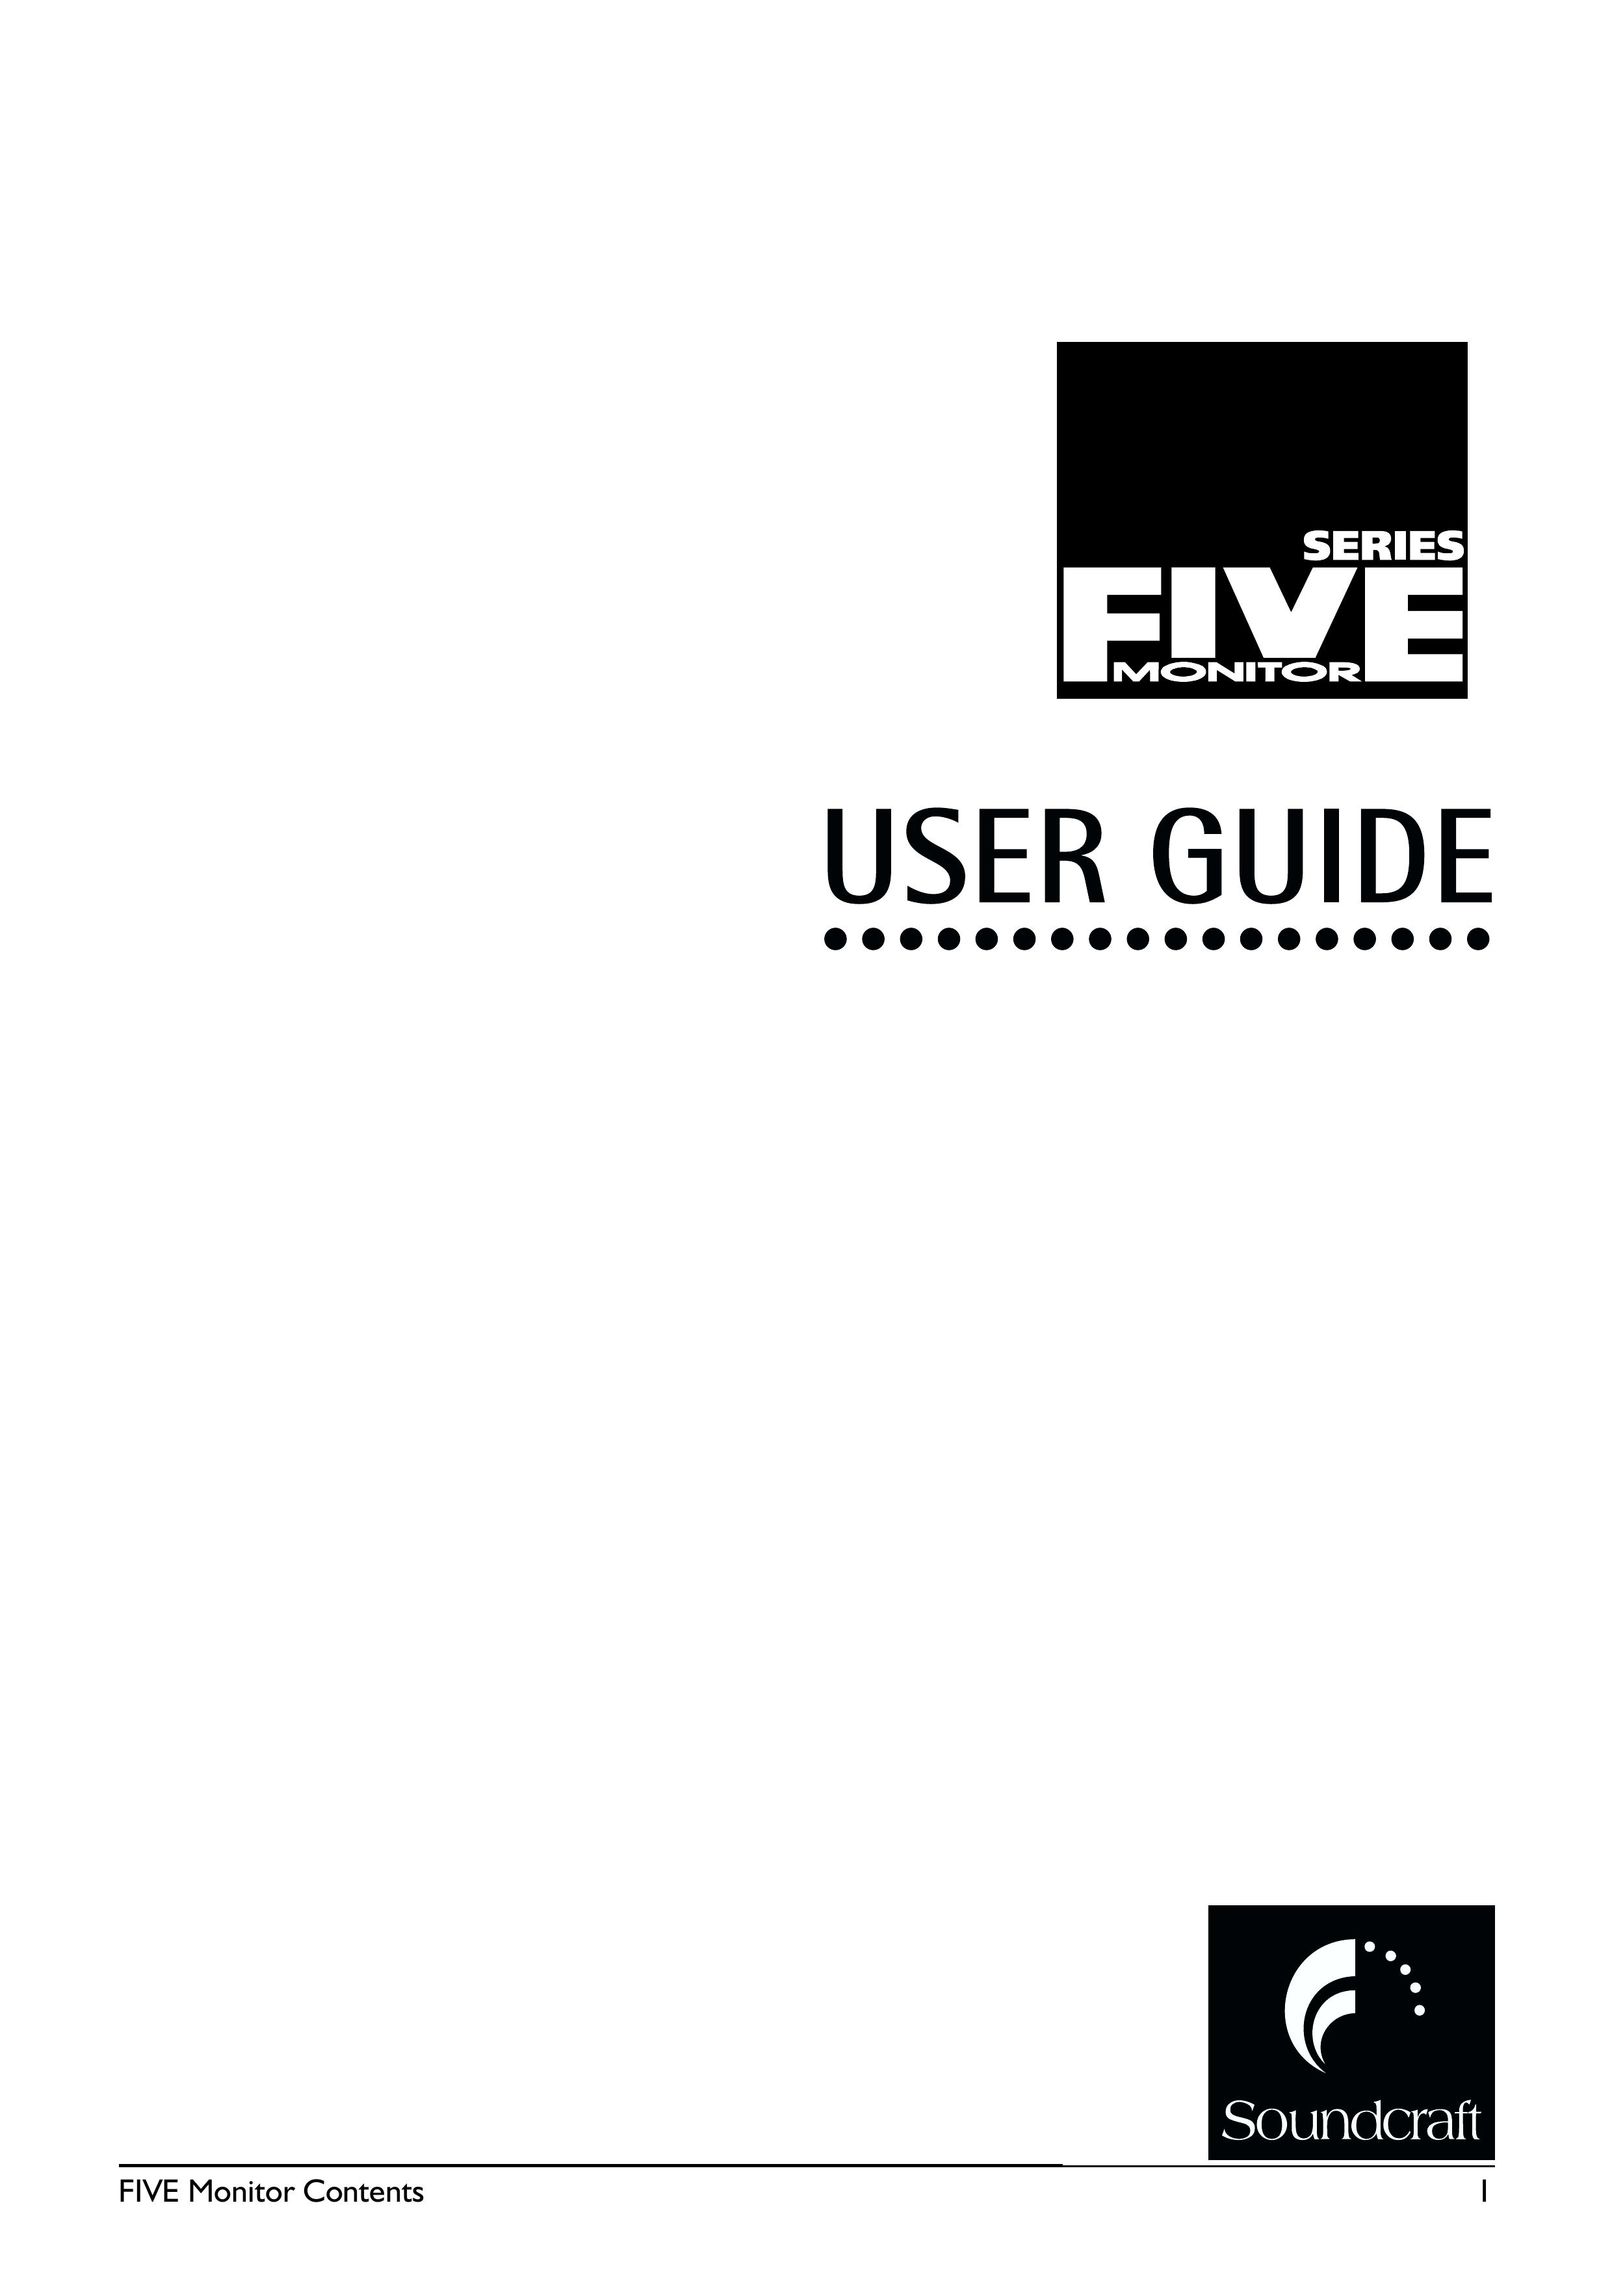 SoundCraft Five Monitor Series Home Theater Server User Manual